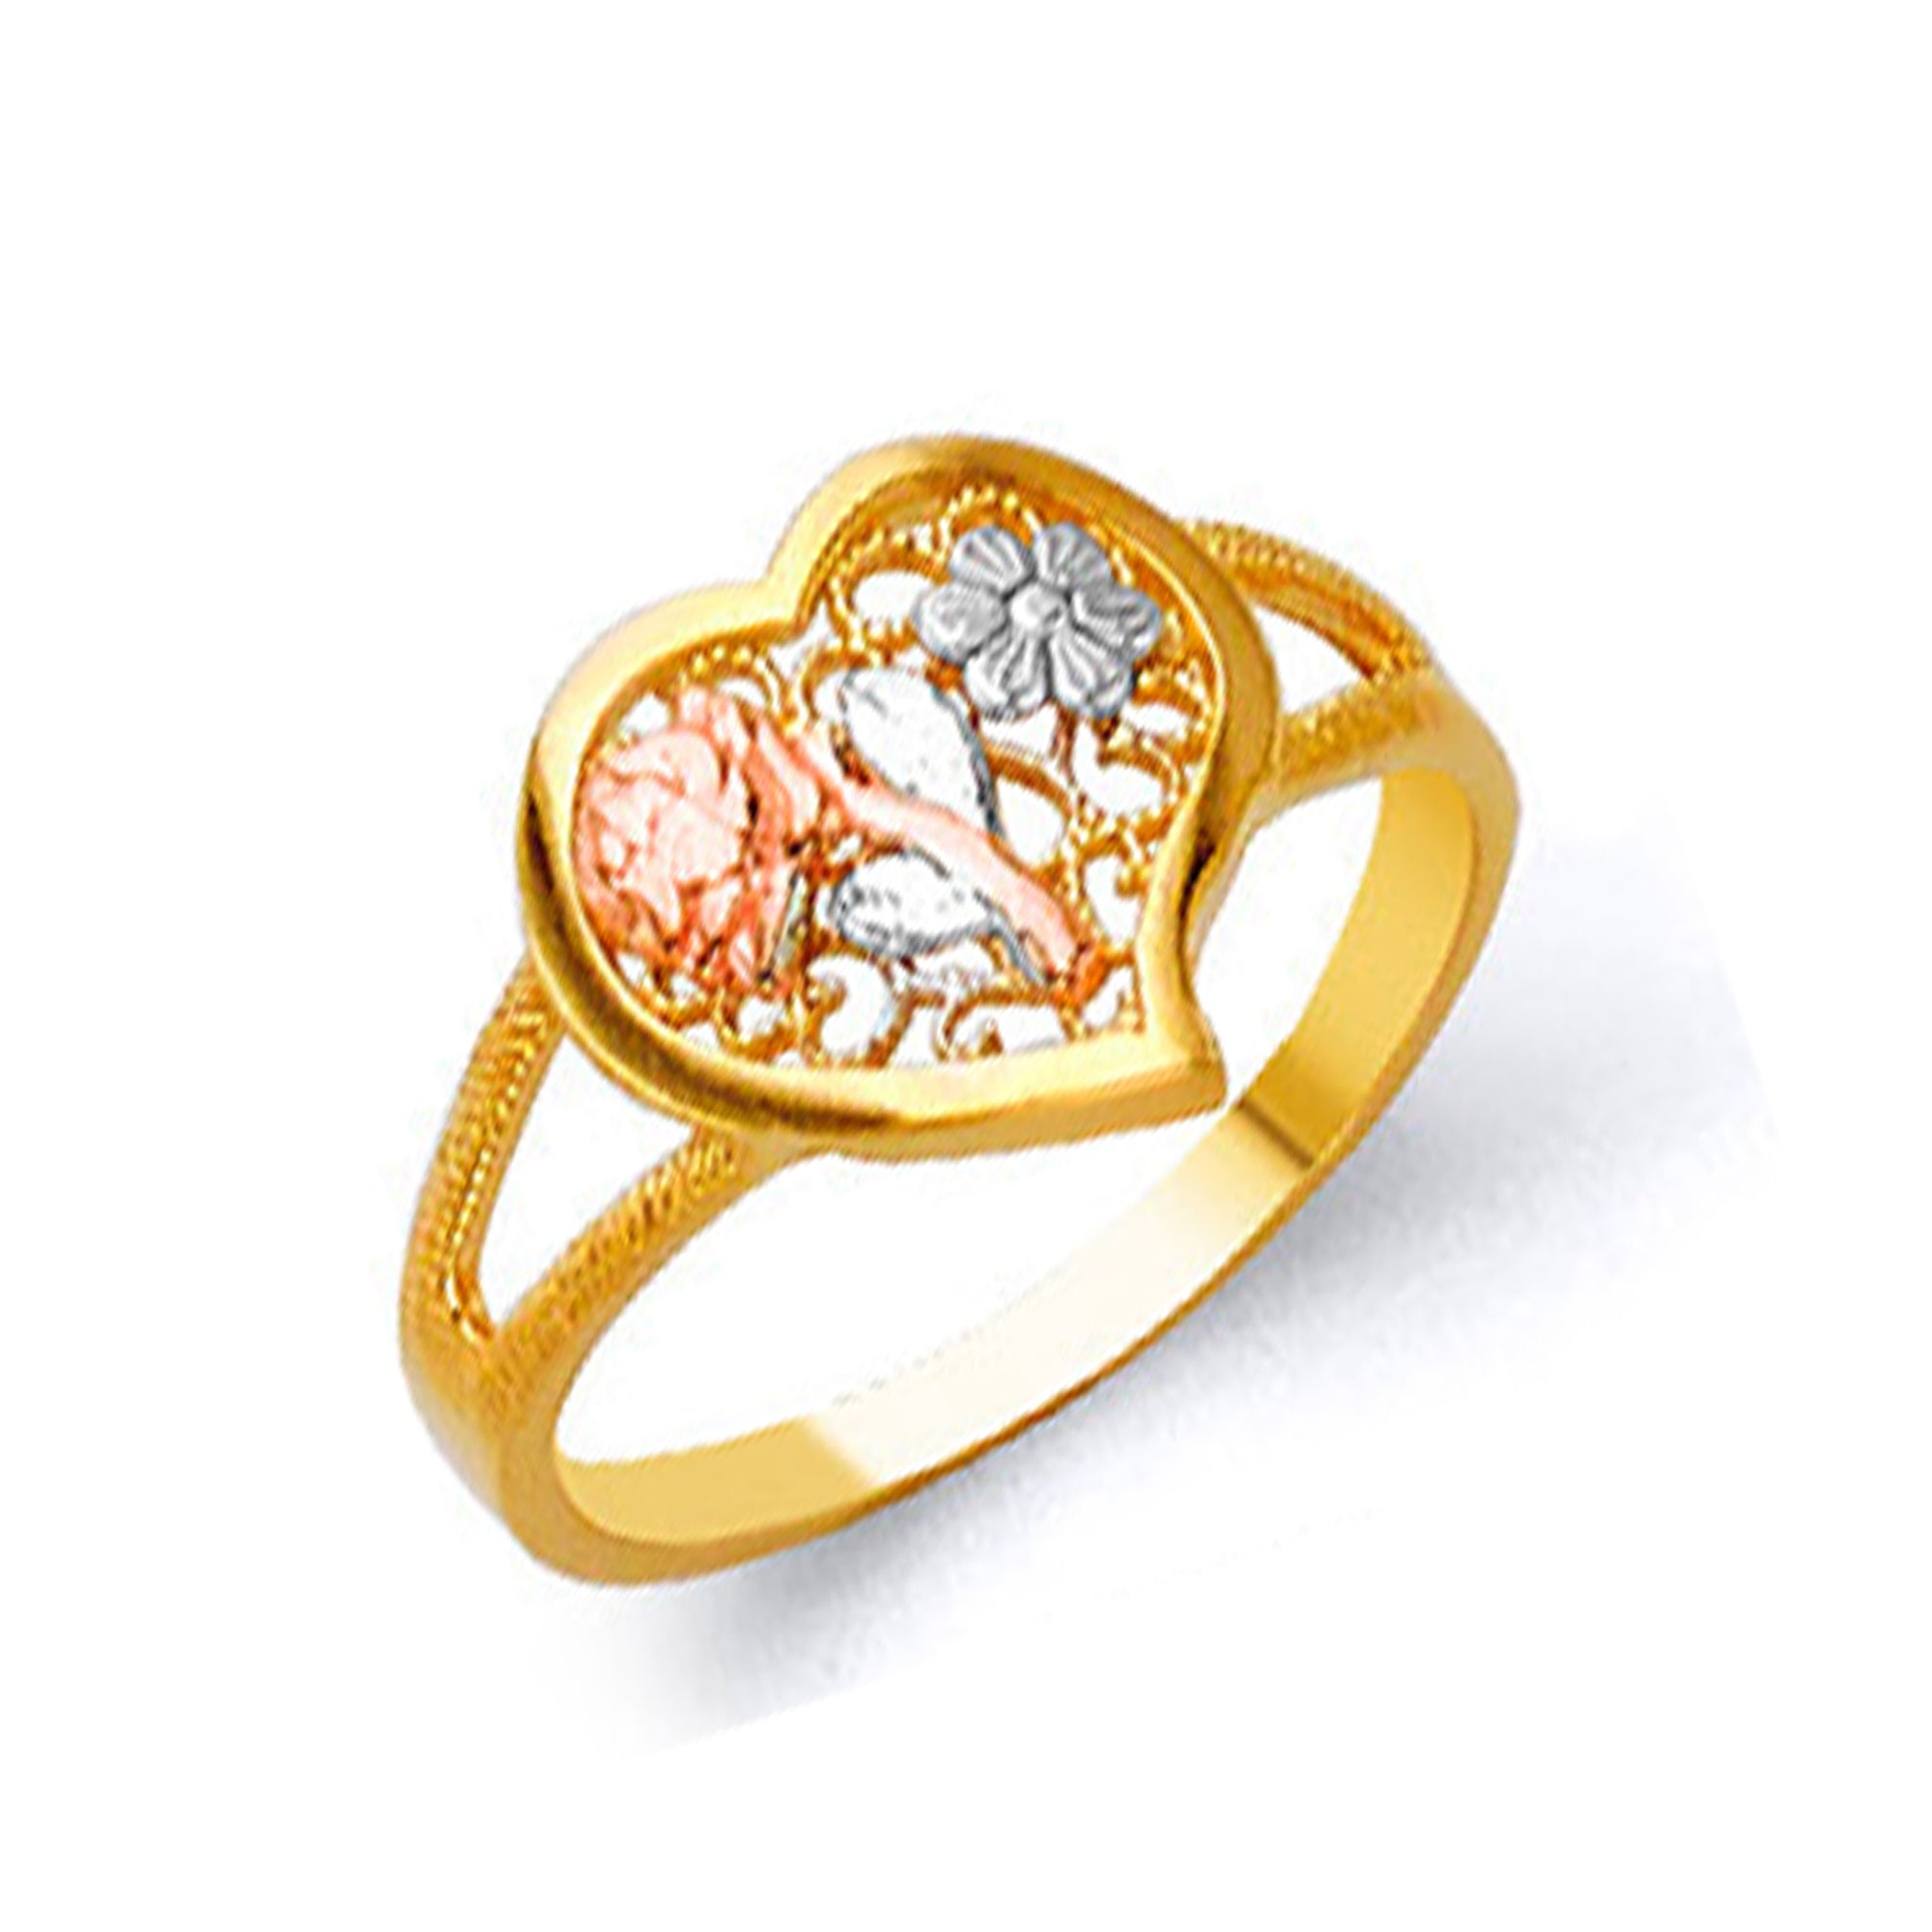 Floral Motif Heart Ring in Solid Gold 